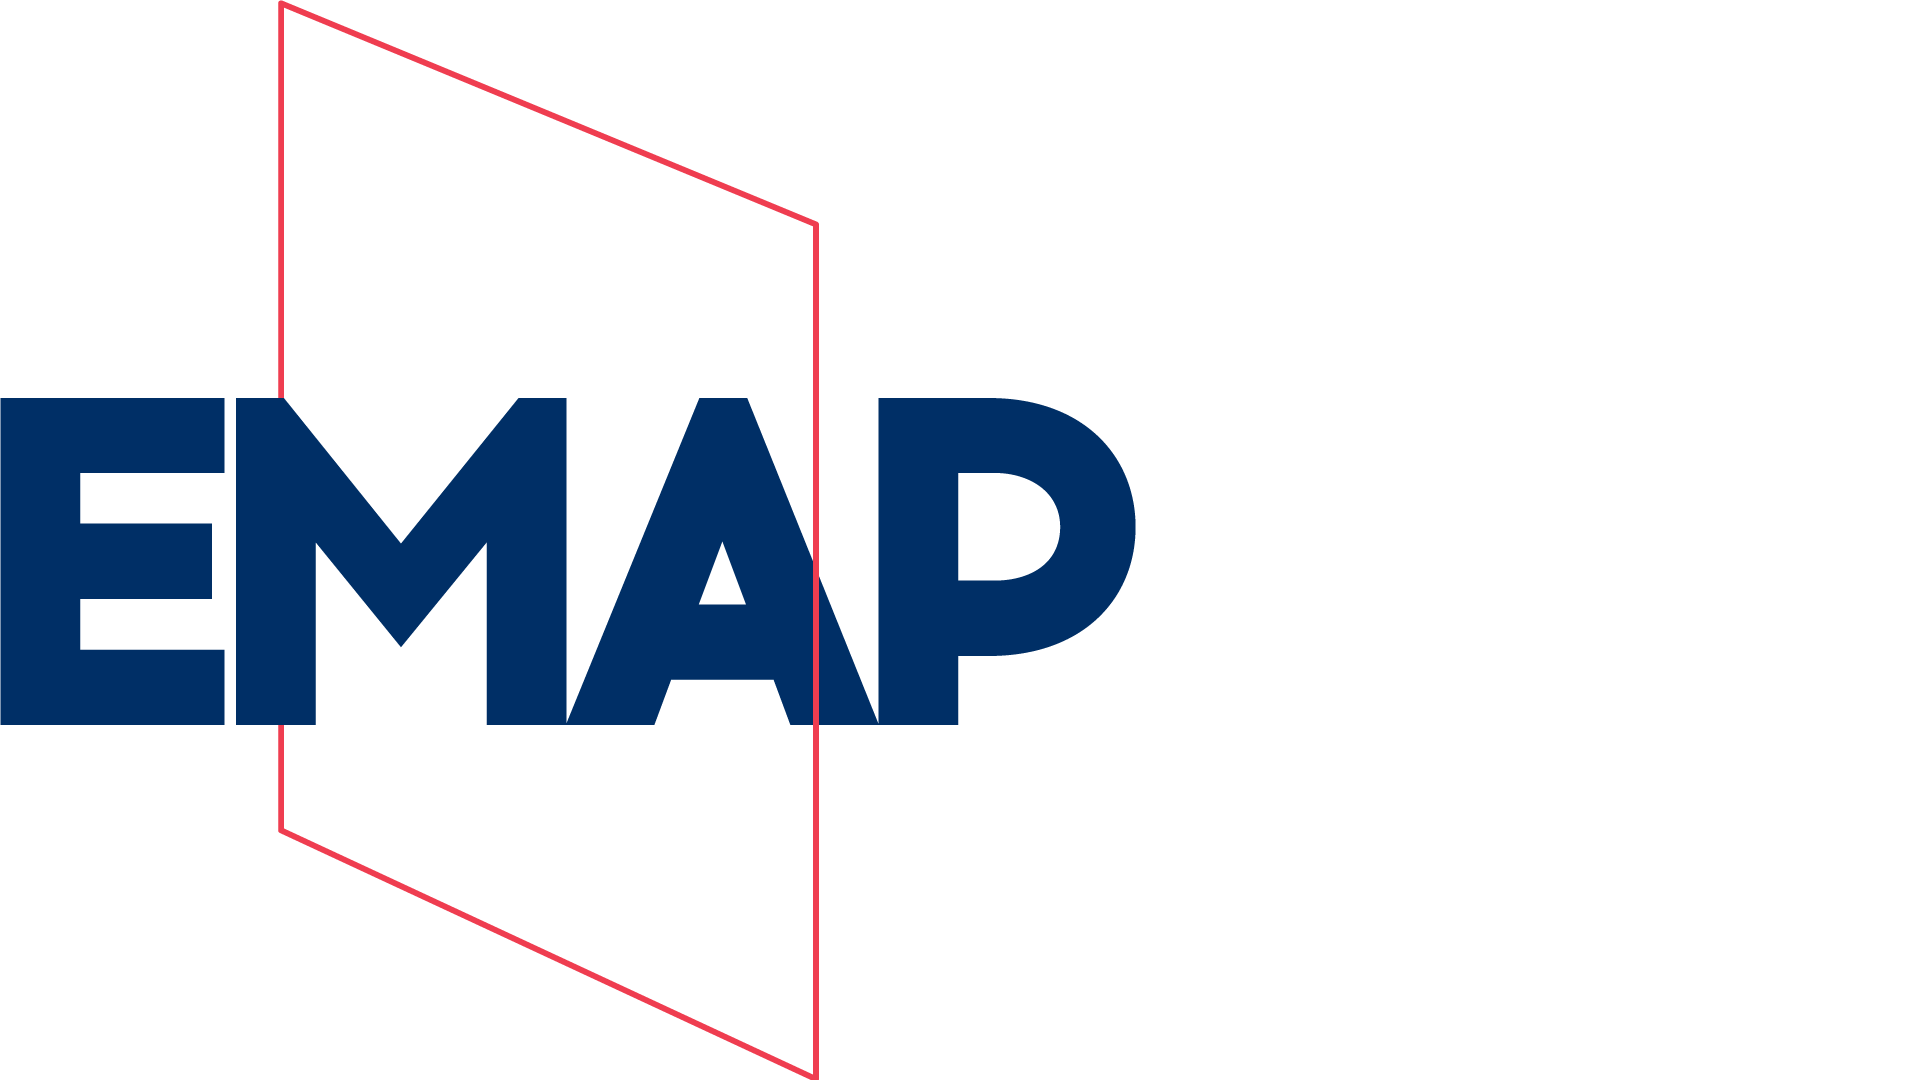 About EMAP